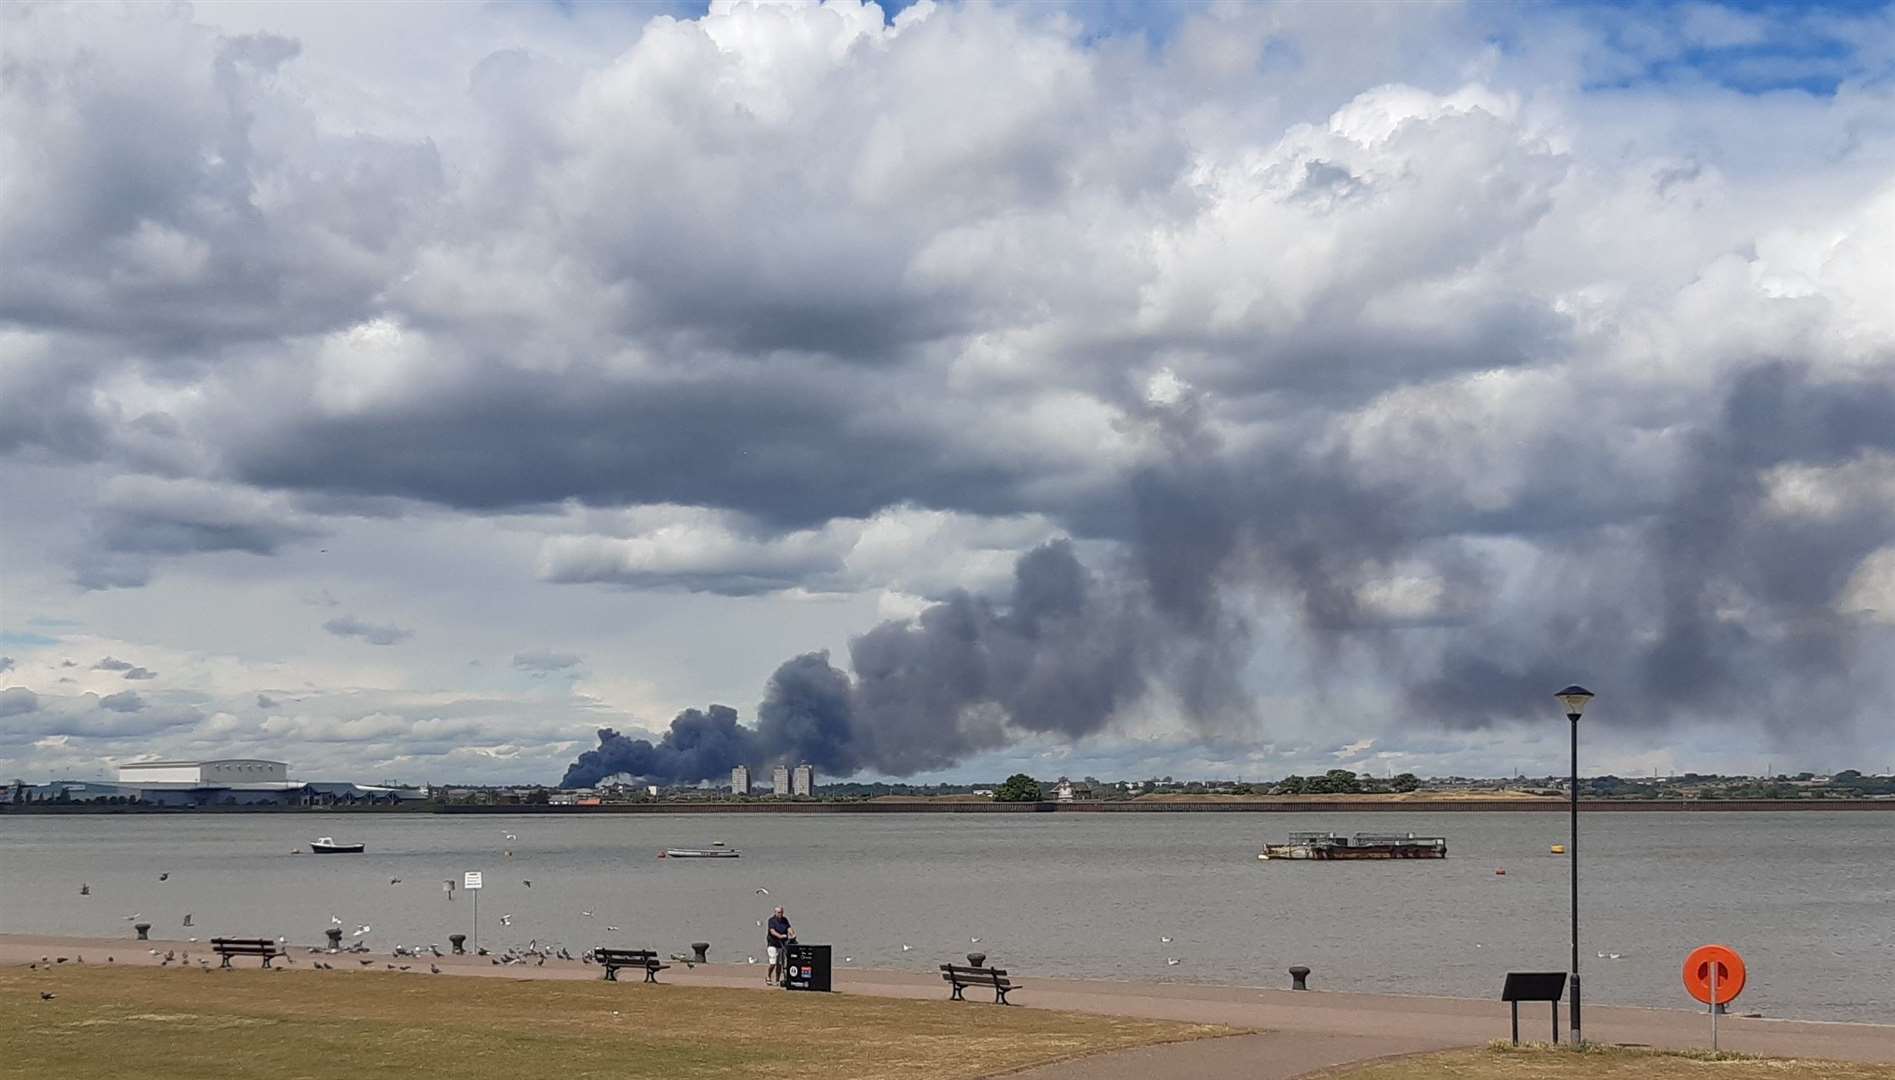 Smoke rising from a fire in Essex, as seen from Gravesend. Images: Kai Bailey